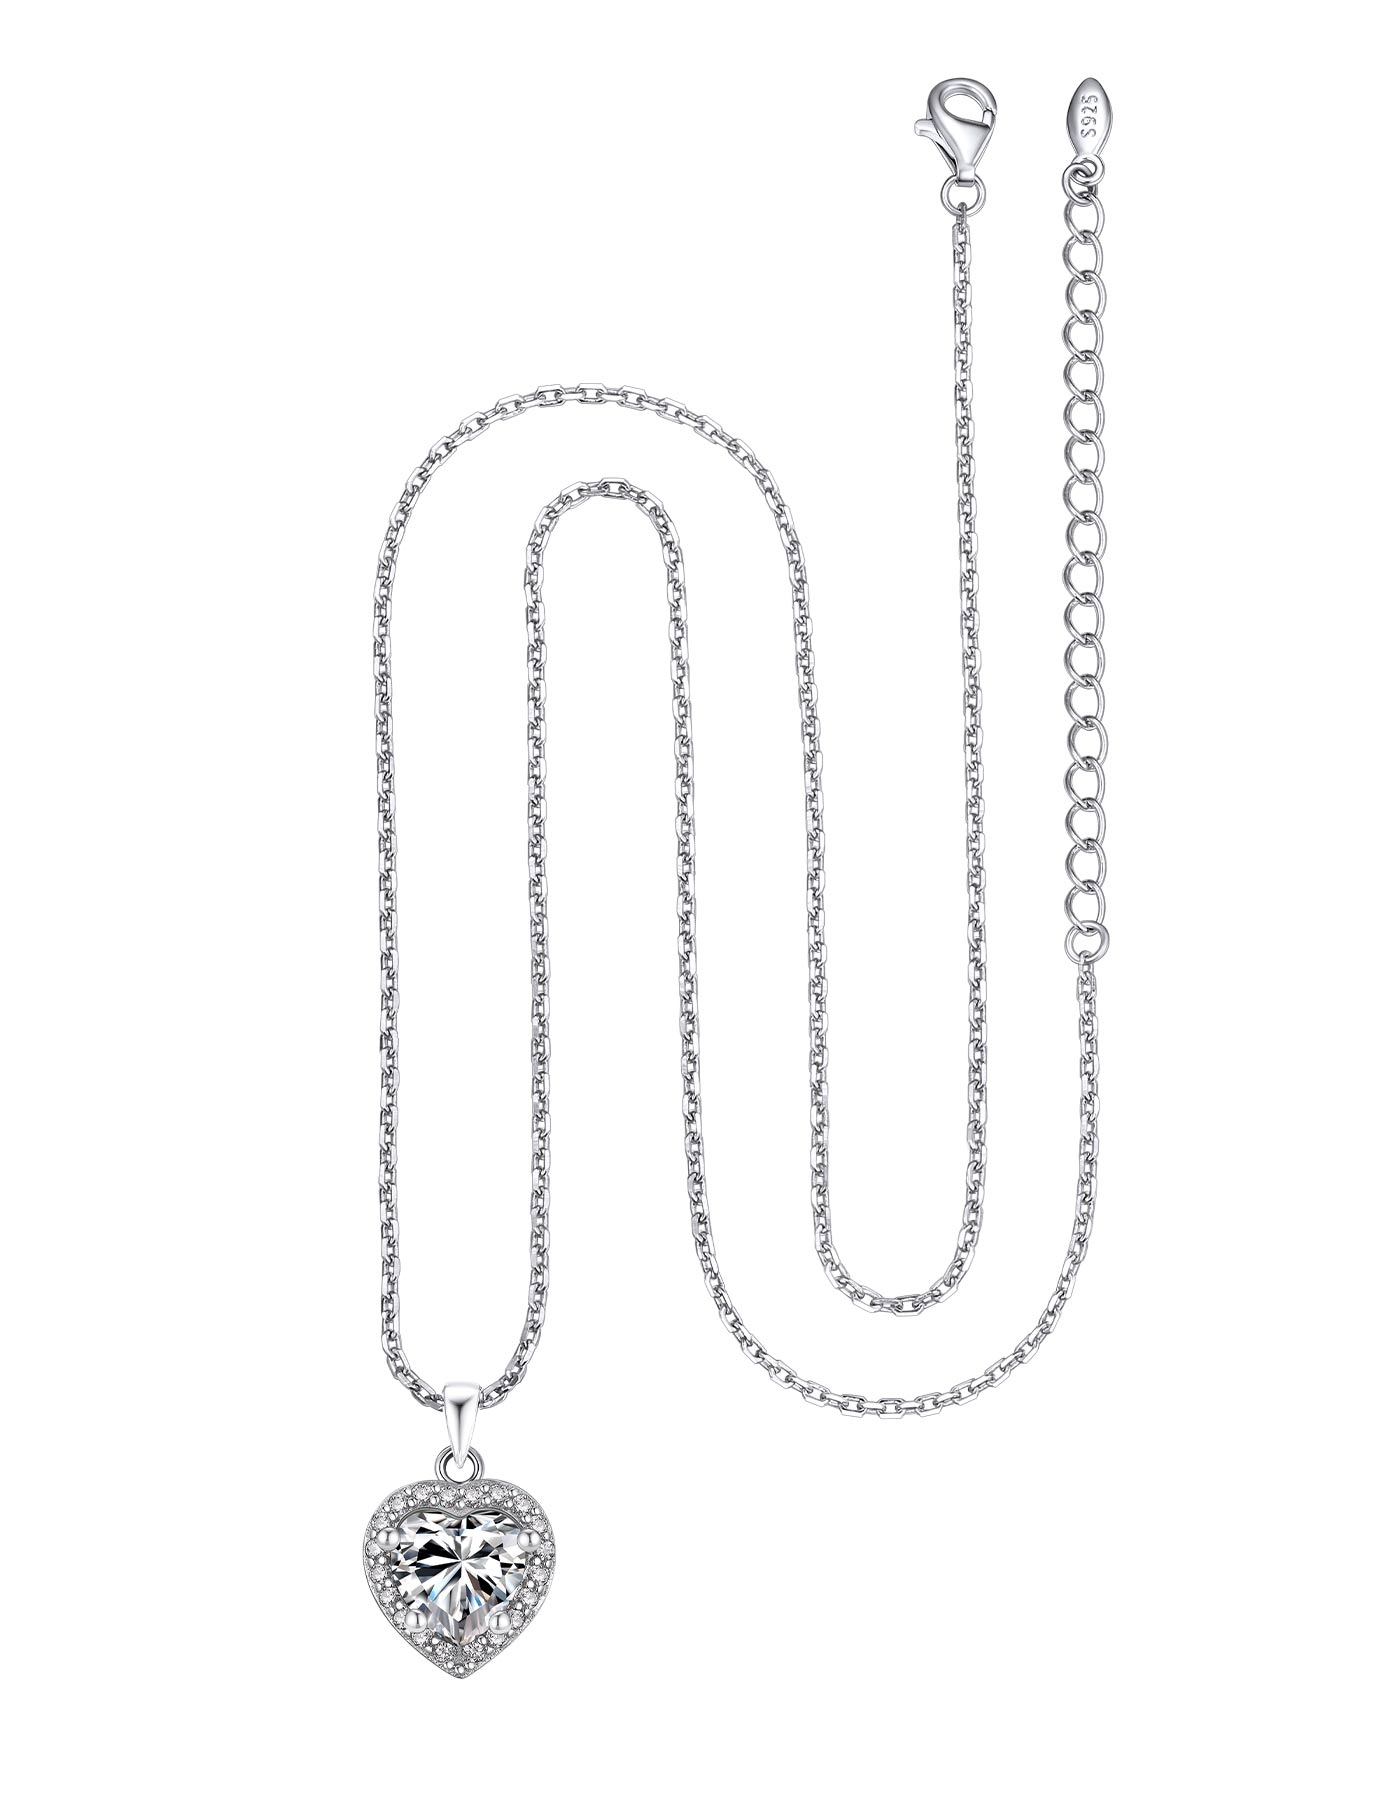 MomentWish Silver Heart Necklace